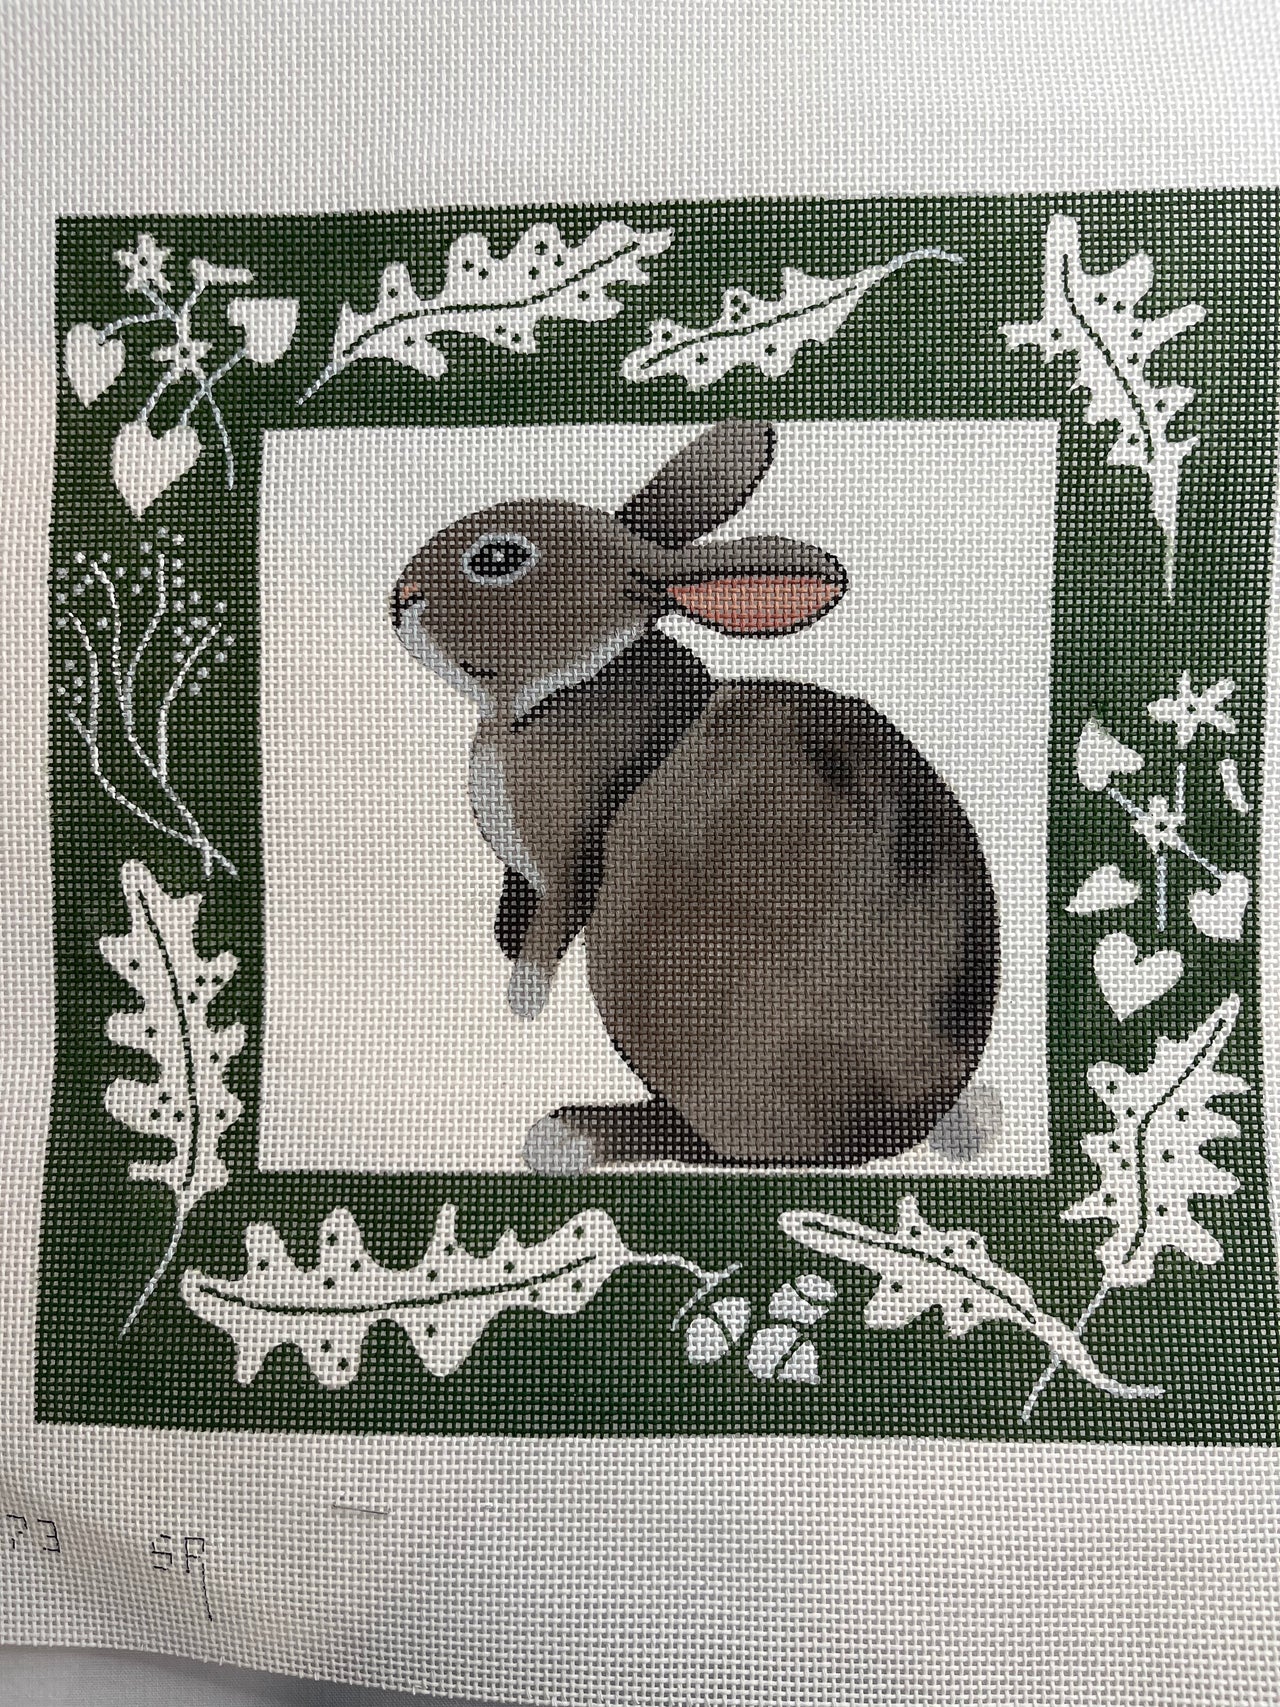 BE1473 Rabbit with Green Border